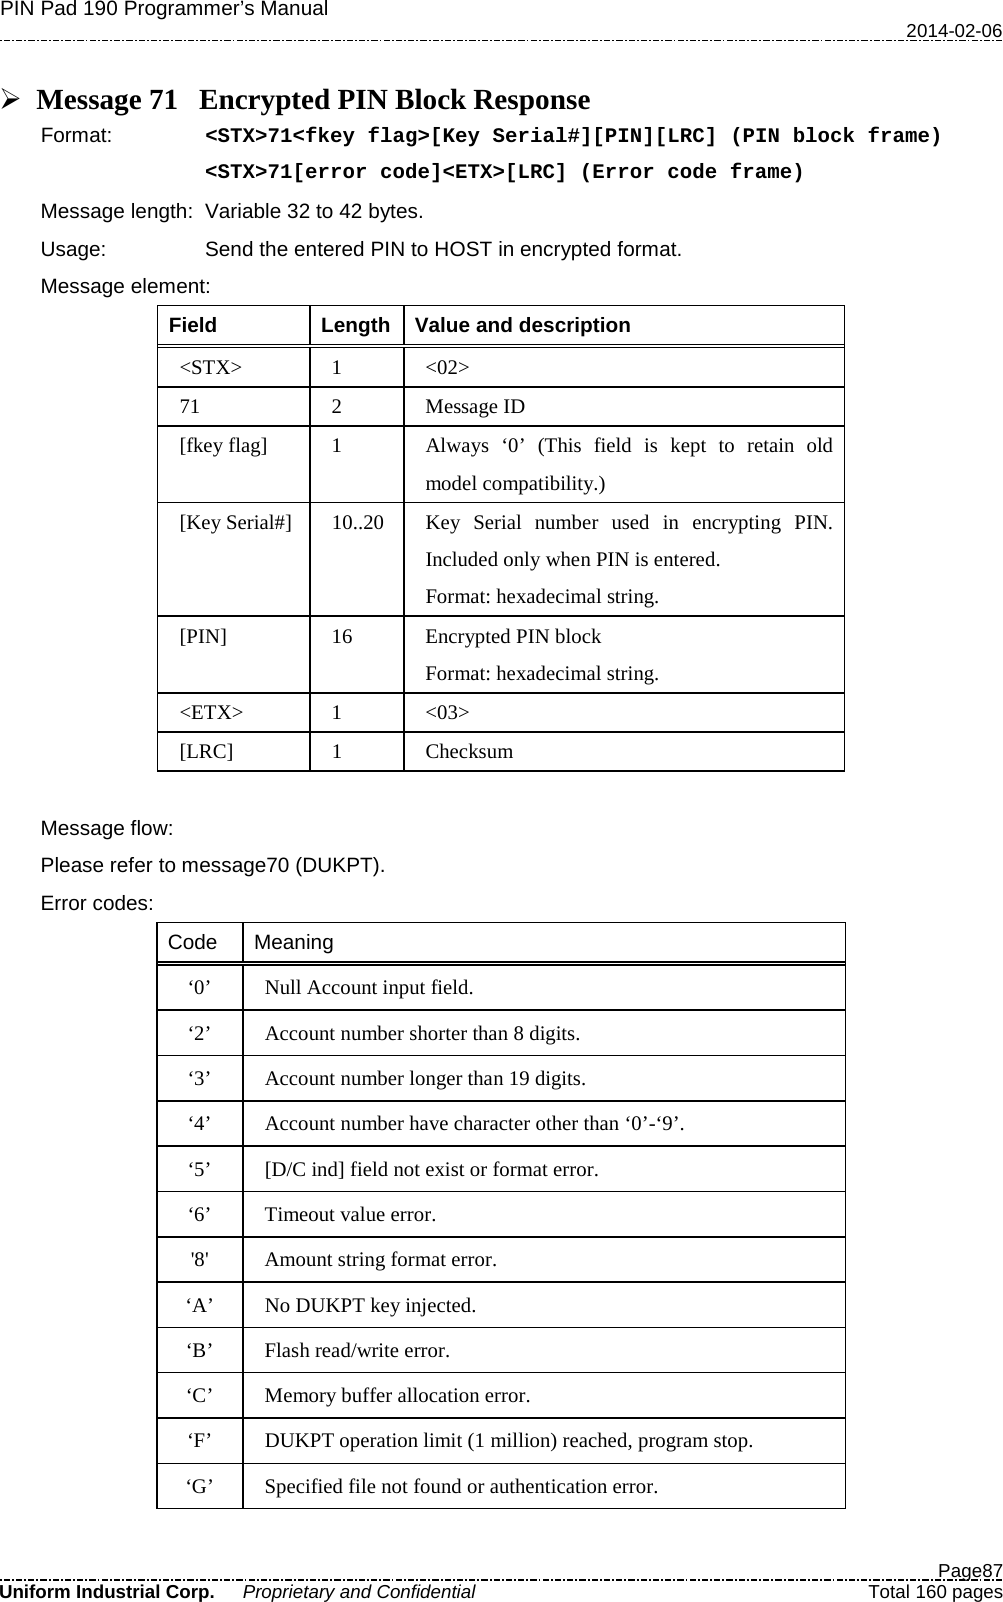 PIN Pad 190 Programmer’s Manual   2014-02-06  Page87 Uniform Industrial Corp. Proprietary and Confidential  Total 160 pages   Message 71 Encrypted PIN Block Response Format:   &lt;STX&gt;71&lt;fkey flag&gt;[Key Serial#][PIN][LRC] (PIN block frame) &lt;STX&gt;71[error code]&lt;ETX&gt;[LRC] (Error code frame) Message length: Variable 32 to 42 bytes. Usage: Send the entered PIN to HOST in encrypted format. Message element: Field  Length  Value and description &lt;STX&gt;  1  &lt;02&gt; 71  2  Message ID [fkey flag]  1  Always  ‘0’ (This field is kept to retain old model compatibility.) [Key Serial#] 10..20 Key Serial number used in encrypting PIN. Included only when PIN is entered. Format: hexadecimal string. [PIN] 16  Encrypted PIN block Format: hexadecimal string. &lt;ETX&gt;  1  &lt;03&gt; [LRC]  1  Checksum  Message flow:   Please refer to message70 (DUKPT). Error codes: Code Meaning ‘0’ Null Account input field. ‘2’ Account number shorter than 8 digits. ‘3’ Account number longer than 19 digits. ‘4’ Account number have character other than ‘0’-‘9’. ‘5’ [D/C ind] field not exist or format error. ‘6’  Timeout value error. &apos;8&apos; Amount string format error. ‘A’ No DUKPT key injected. ‘B’ Flash read/write error. ‘C’ Memory buffer allocation error. ‘F’ DUKPT operation limit (1 million) reached, program stop. ‘G’  Specified file not found or authentication error. 